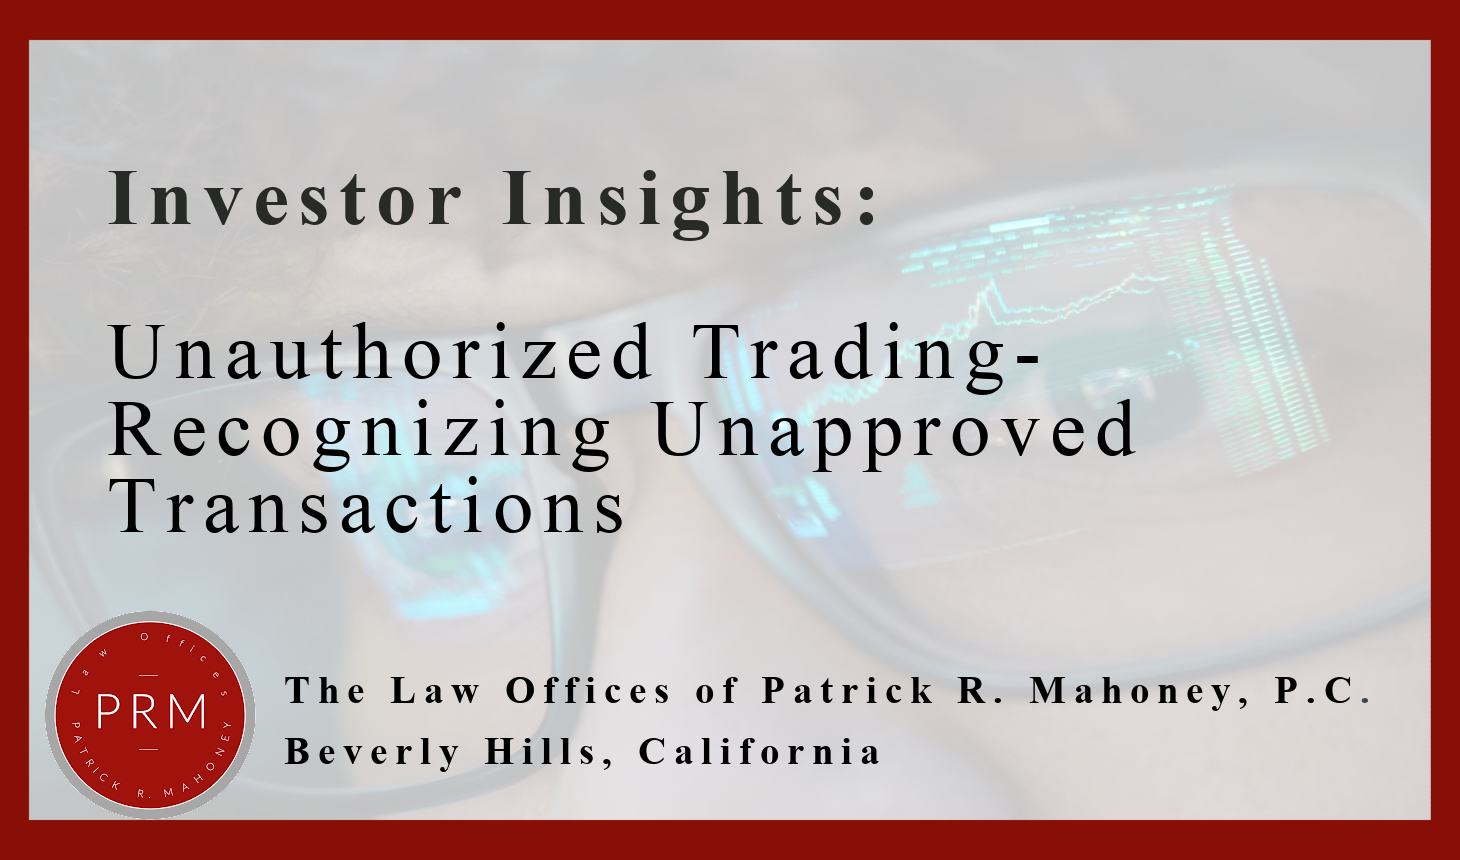 Unauthorized Trading – Recognizing Unapproved Transactions